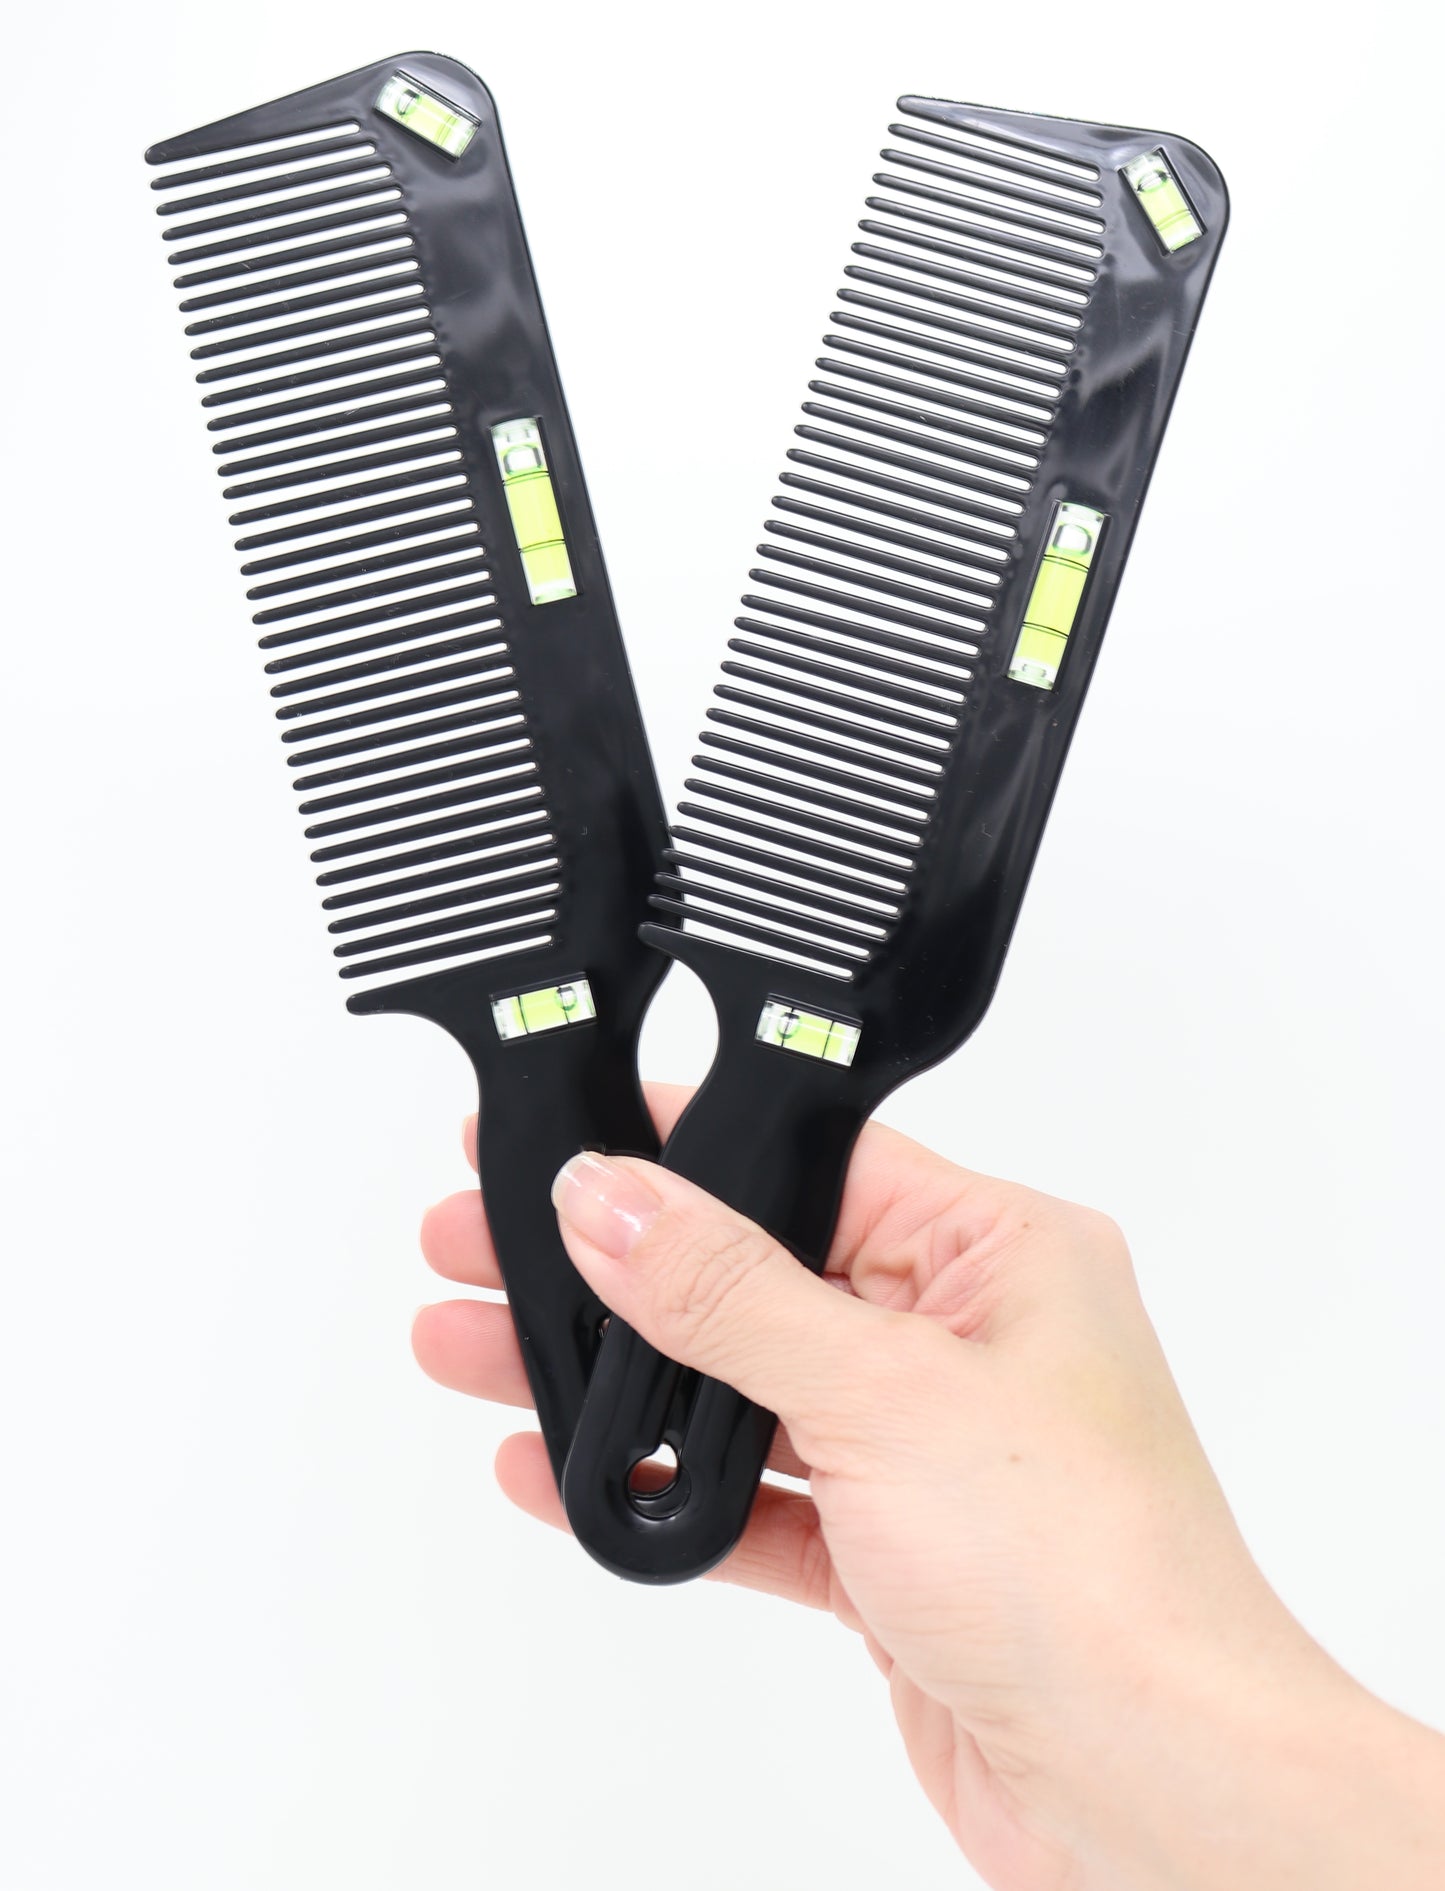 Scalpmaster Clipper Comb With Level Blending Flat Top Guide Hair Comb Barber Cutting Barber Wide Tooth Comb Styling Black 2 Pc.